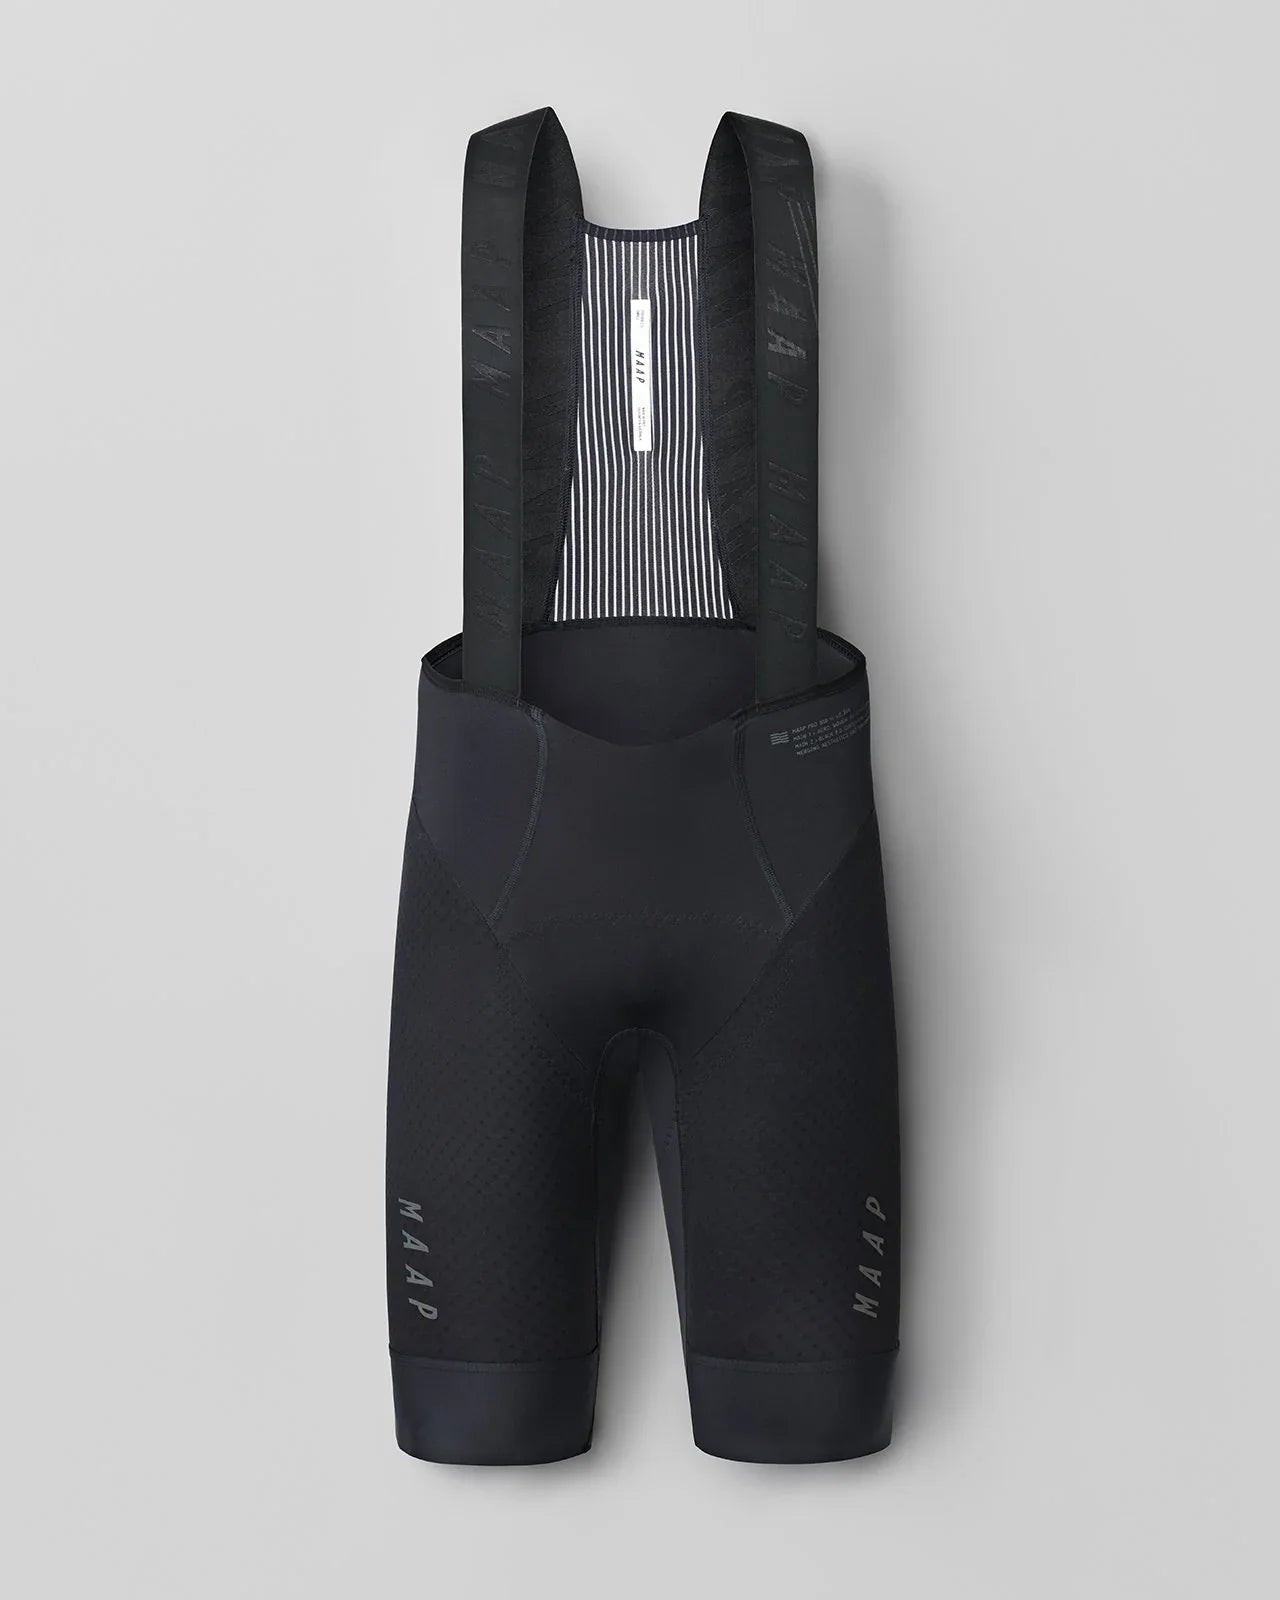 How to Pee in Bib Shorts